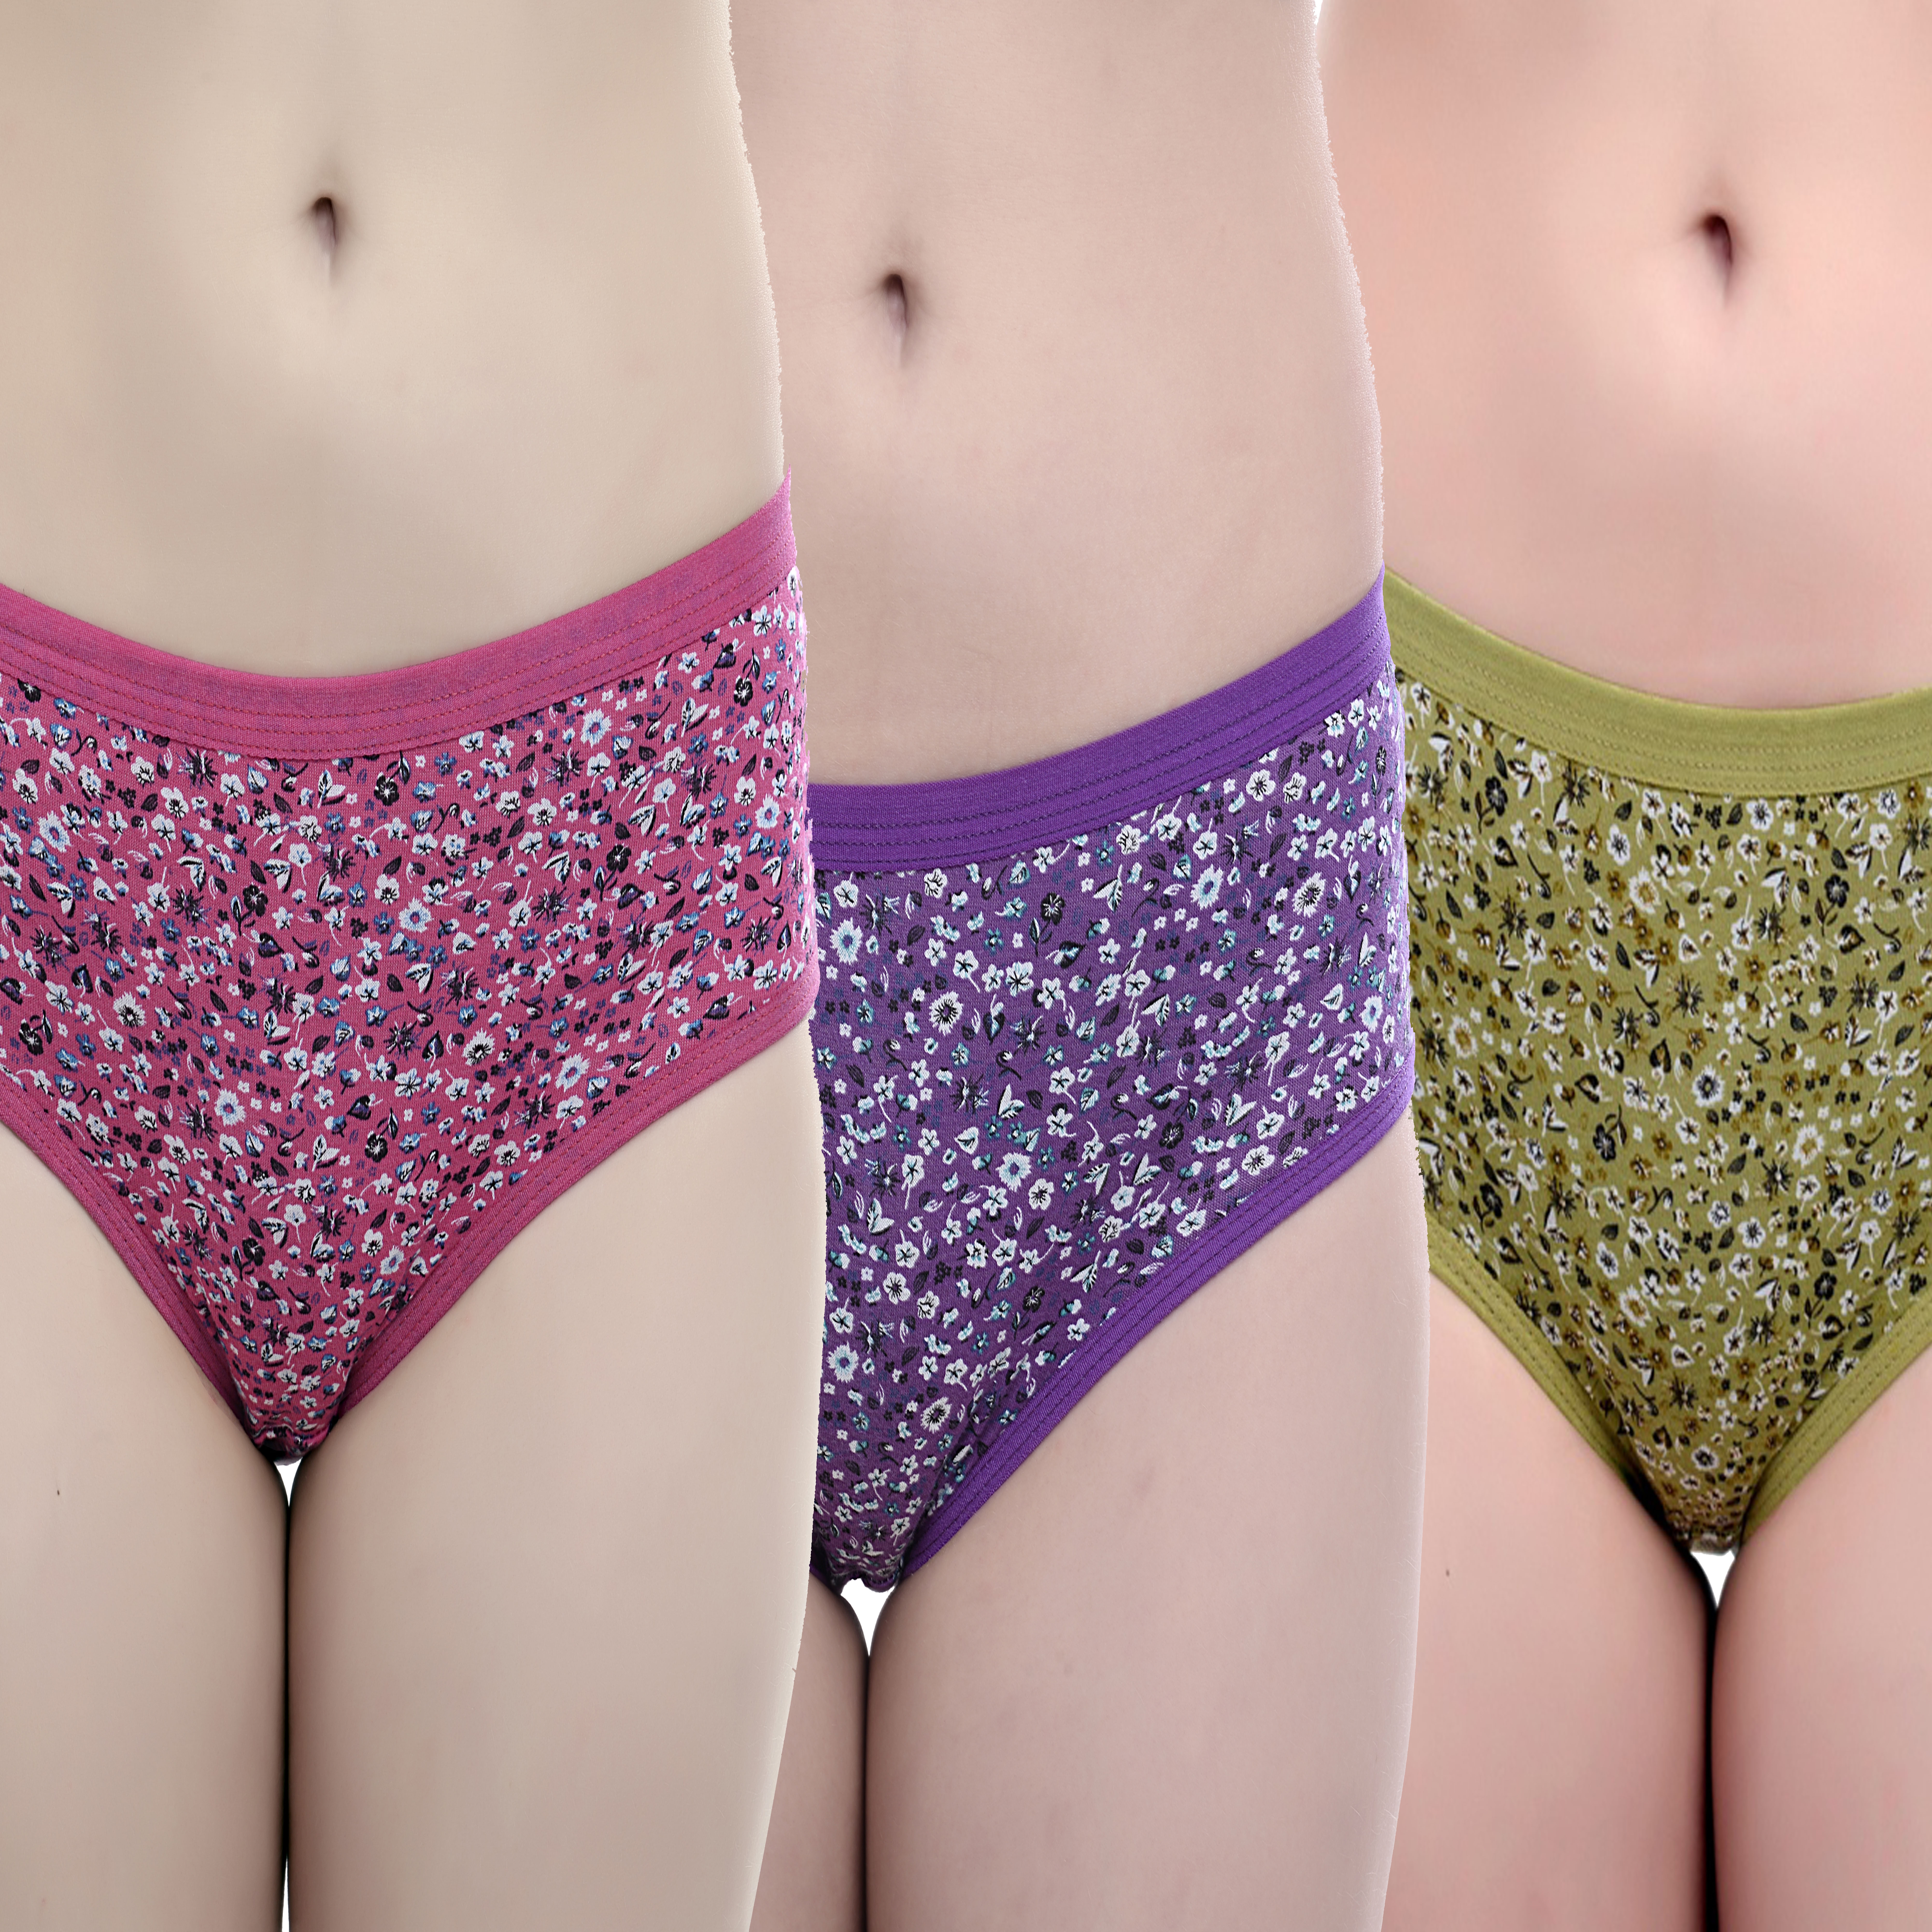 KAMMY FASHIONABLES | Kammy Fashionables Purple, Green & Pink Colour Soft Cotton Printed Panties (Set of 3 Panties)